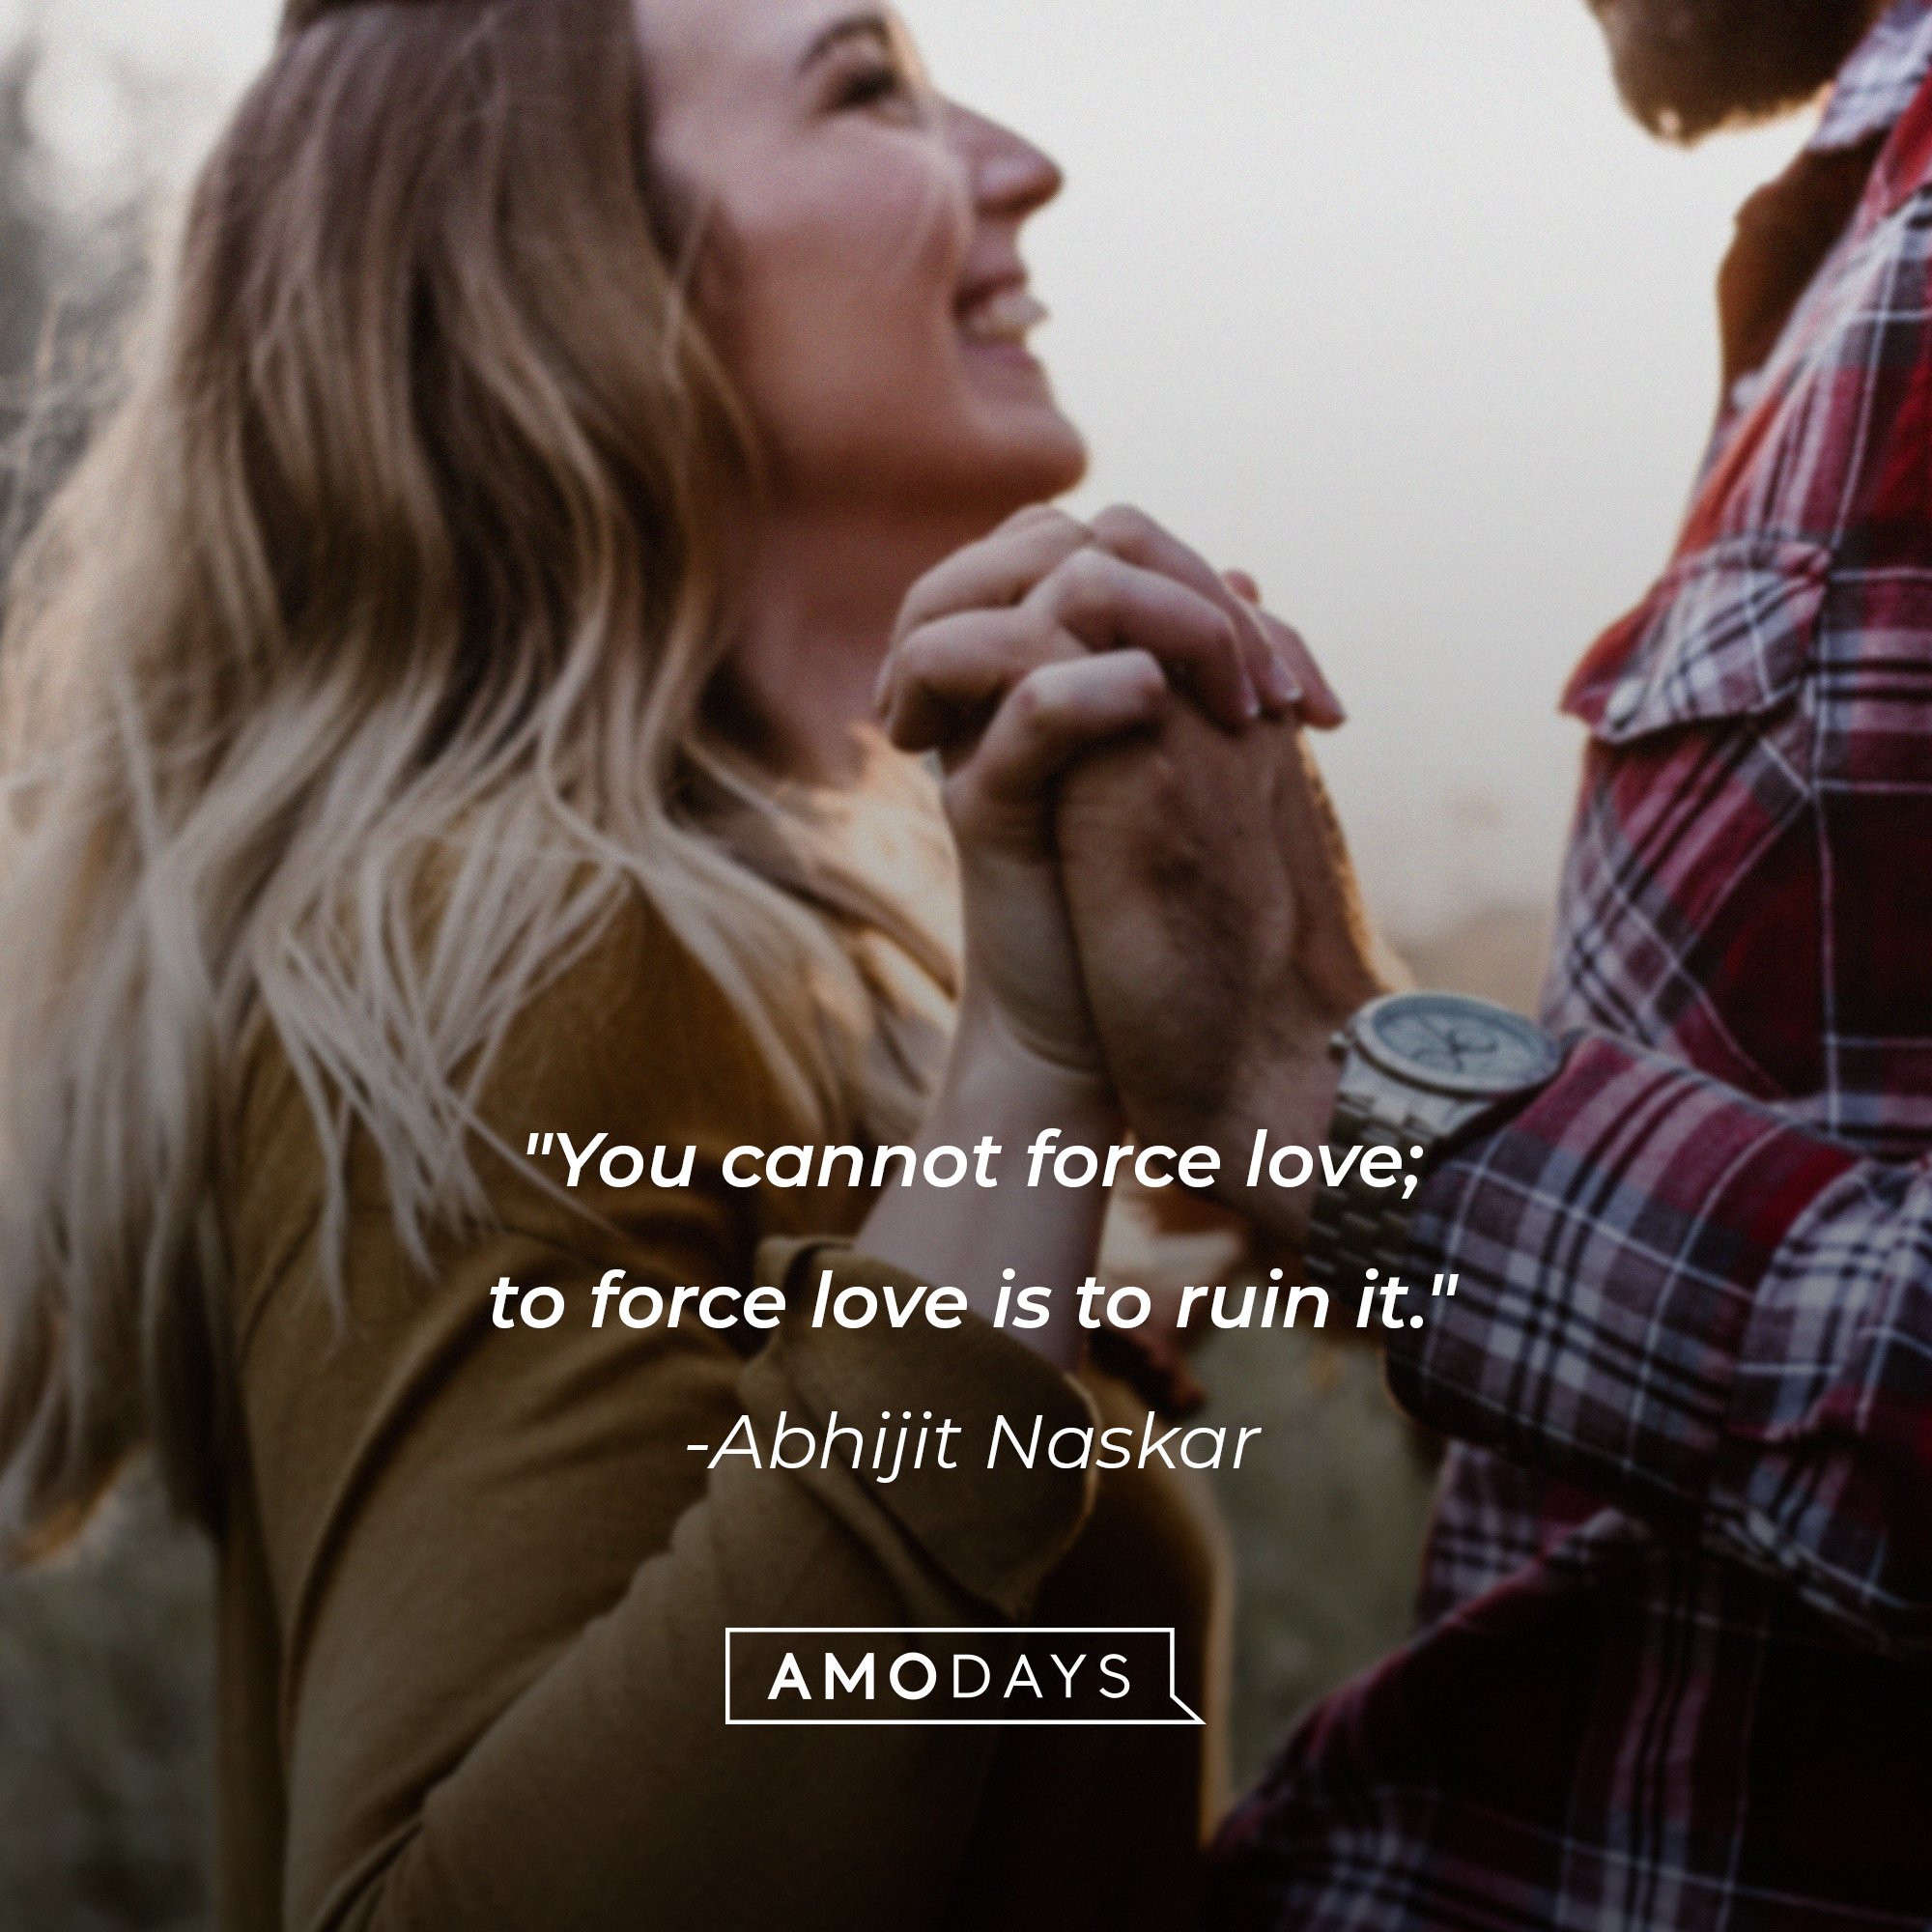 Abhijit Naskar’s quote: "You cannot force love; to force love is to ruin it." | Image: AmoDays  